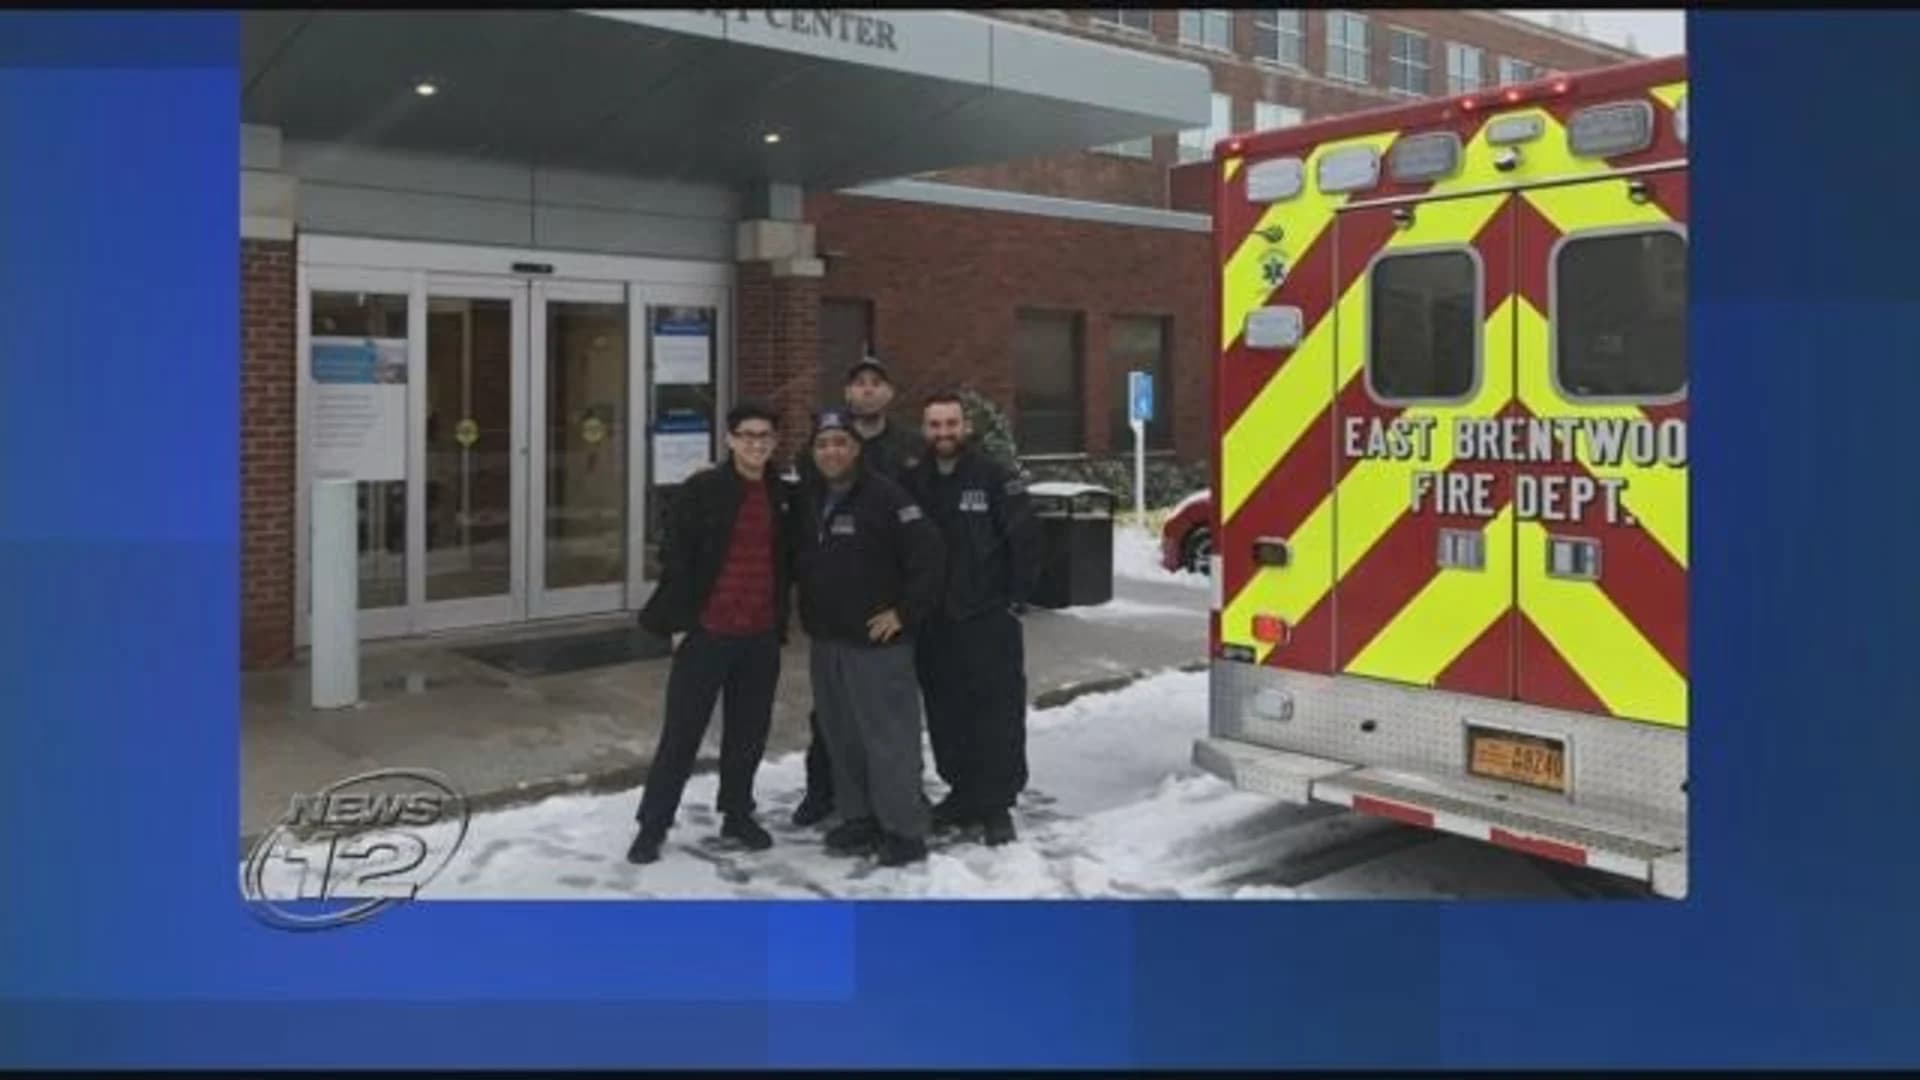 Suffolk firefighters, EMT help deliver baby at firehouse during storm